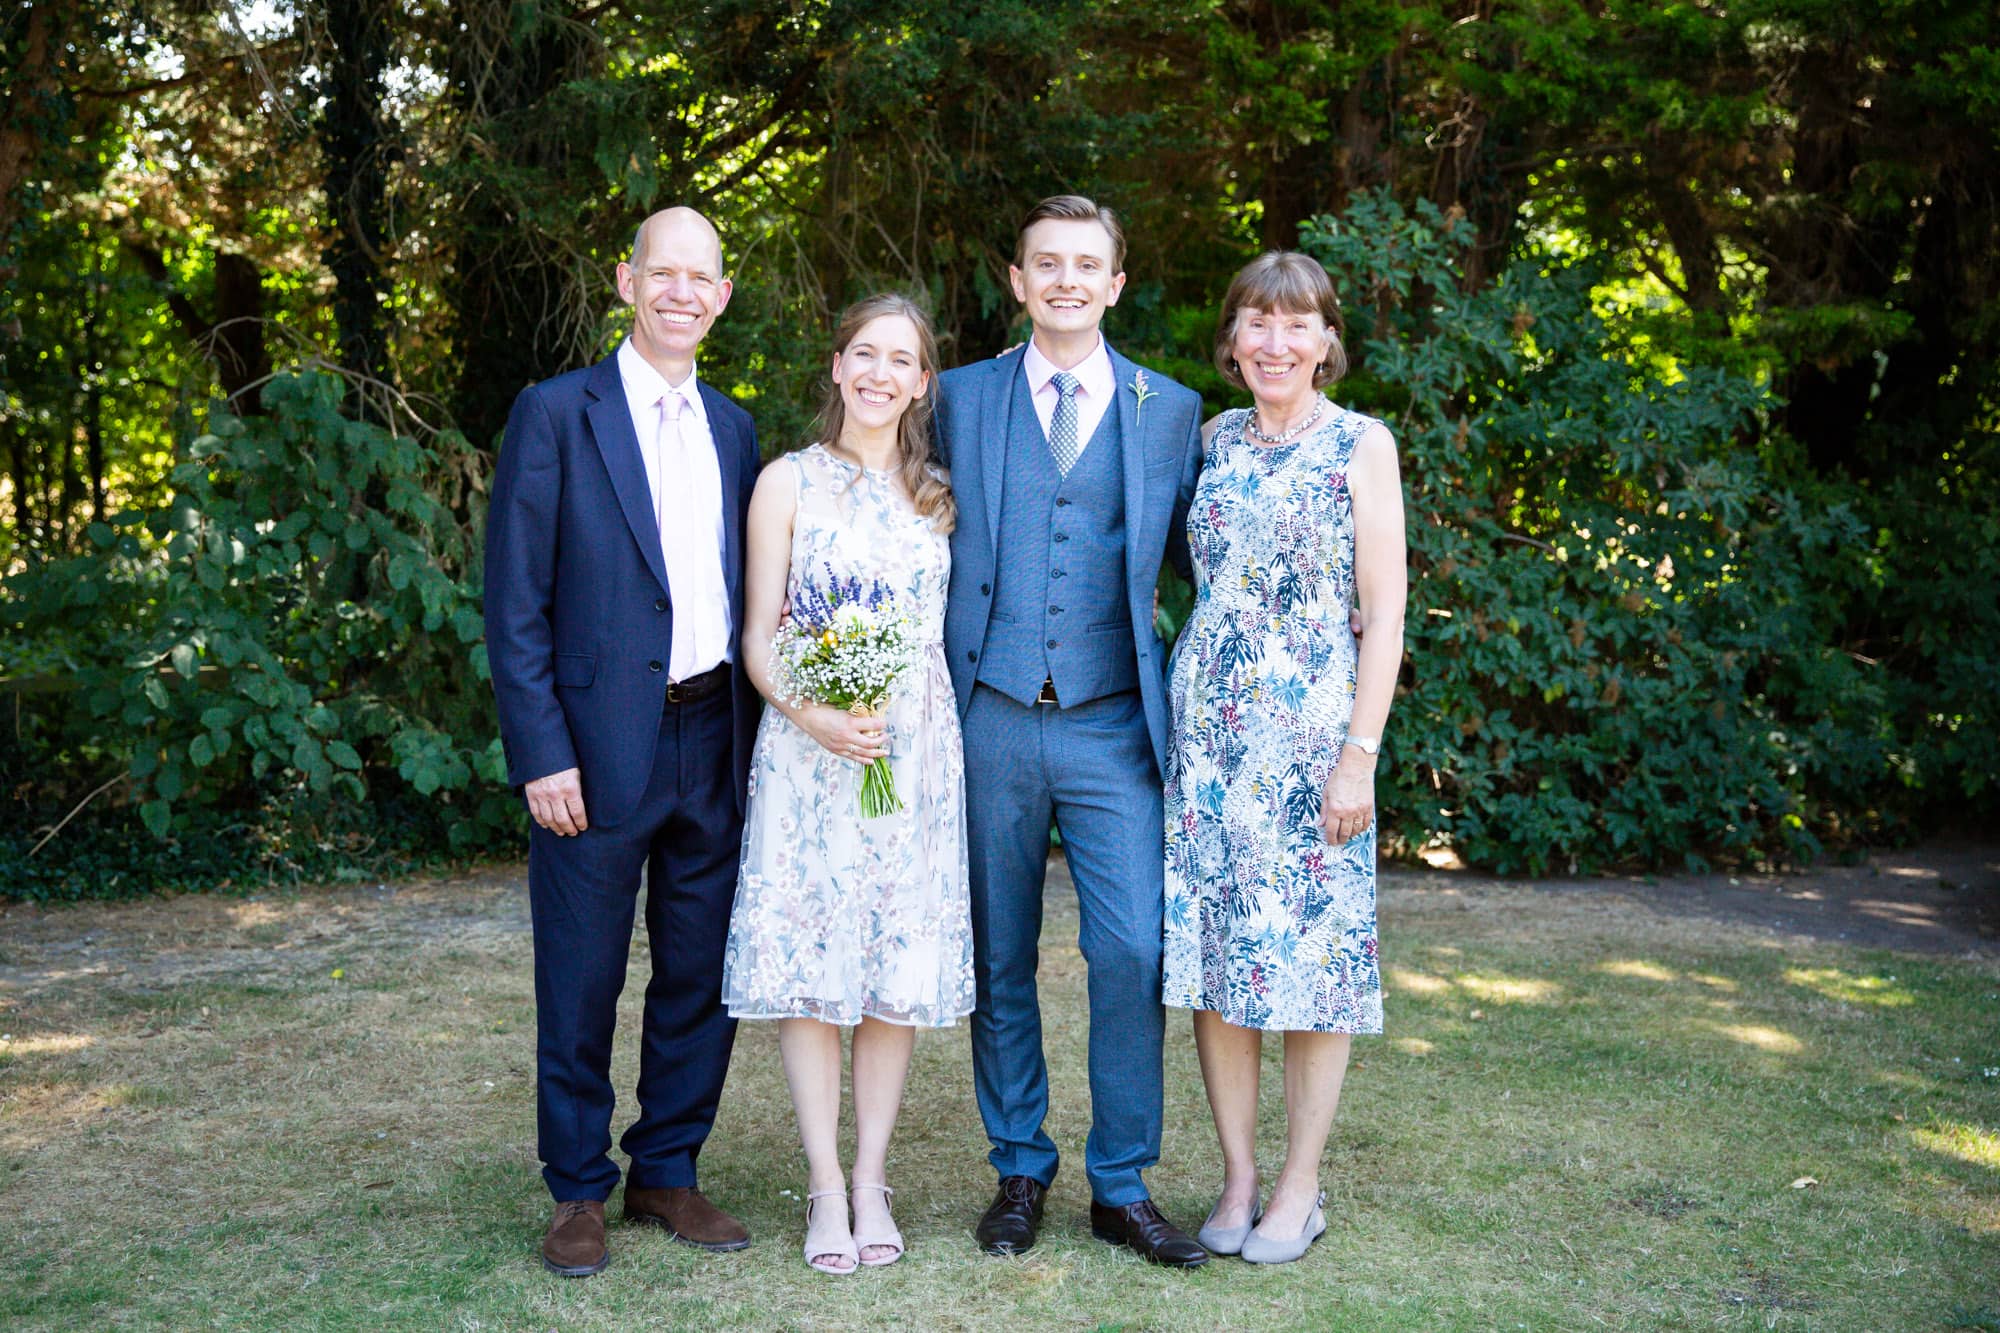 Bride and groom with parents in Family group wedding photo by Bromley photographer at Oaks Farm Weddings venue